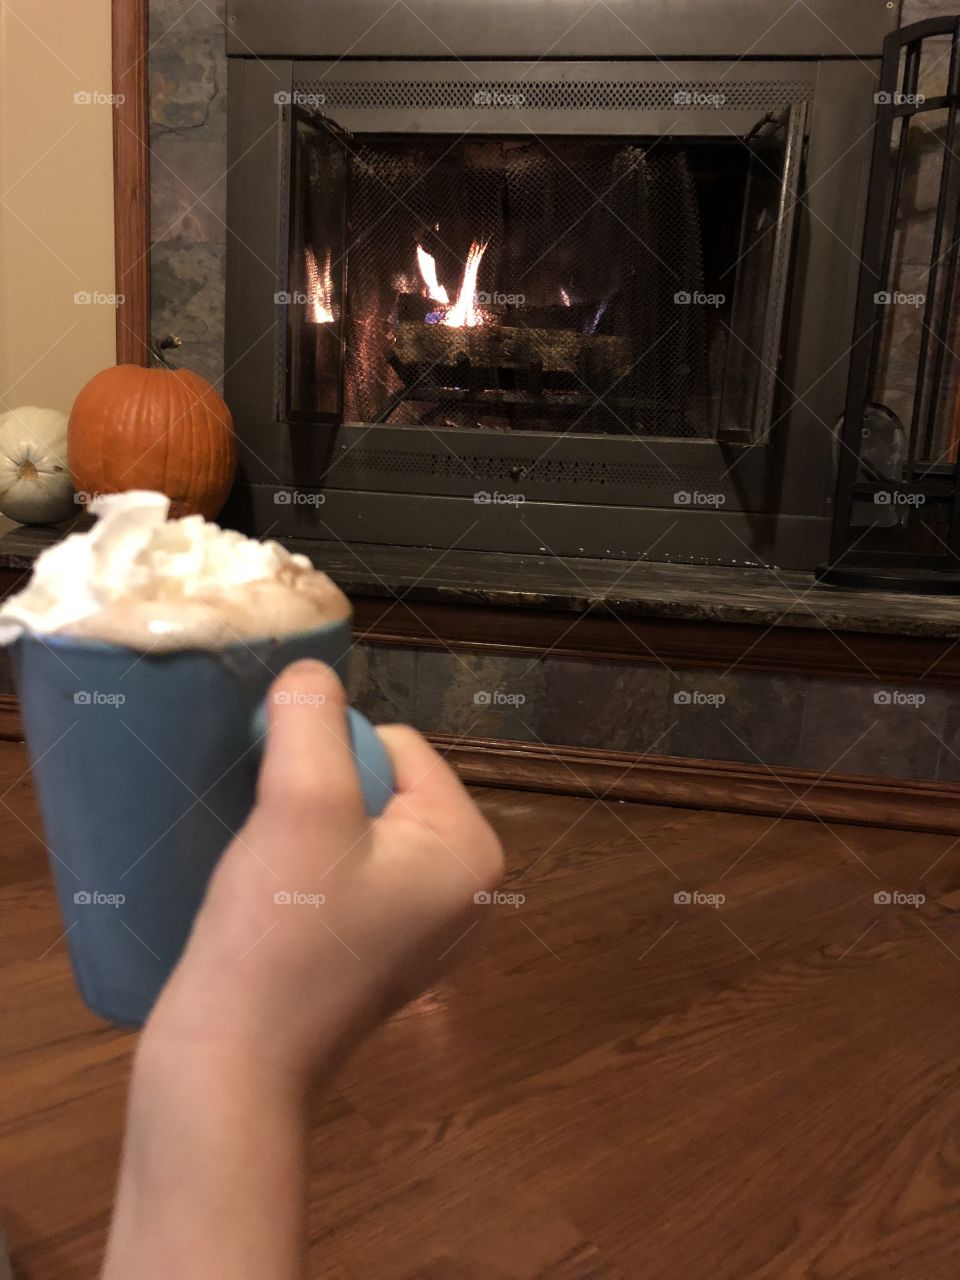 Hot chocolate by the fireplace